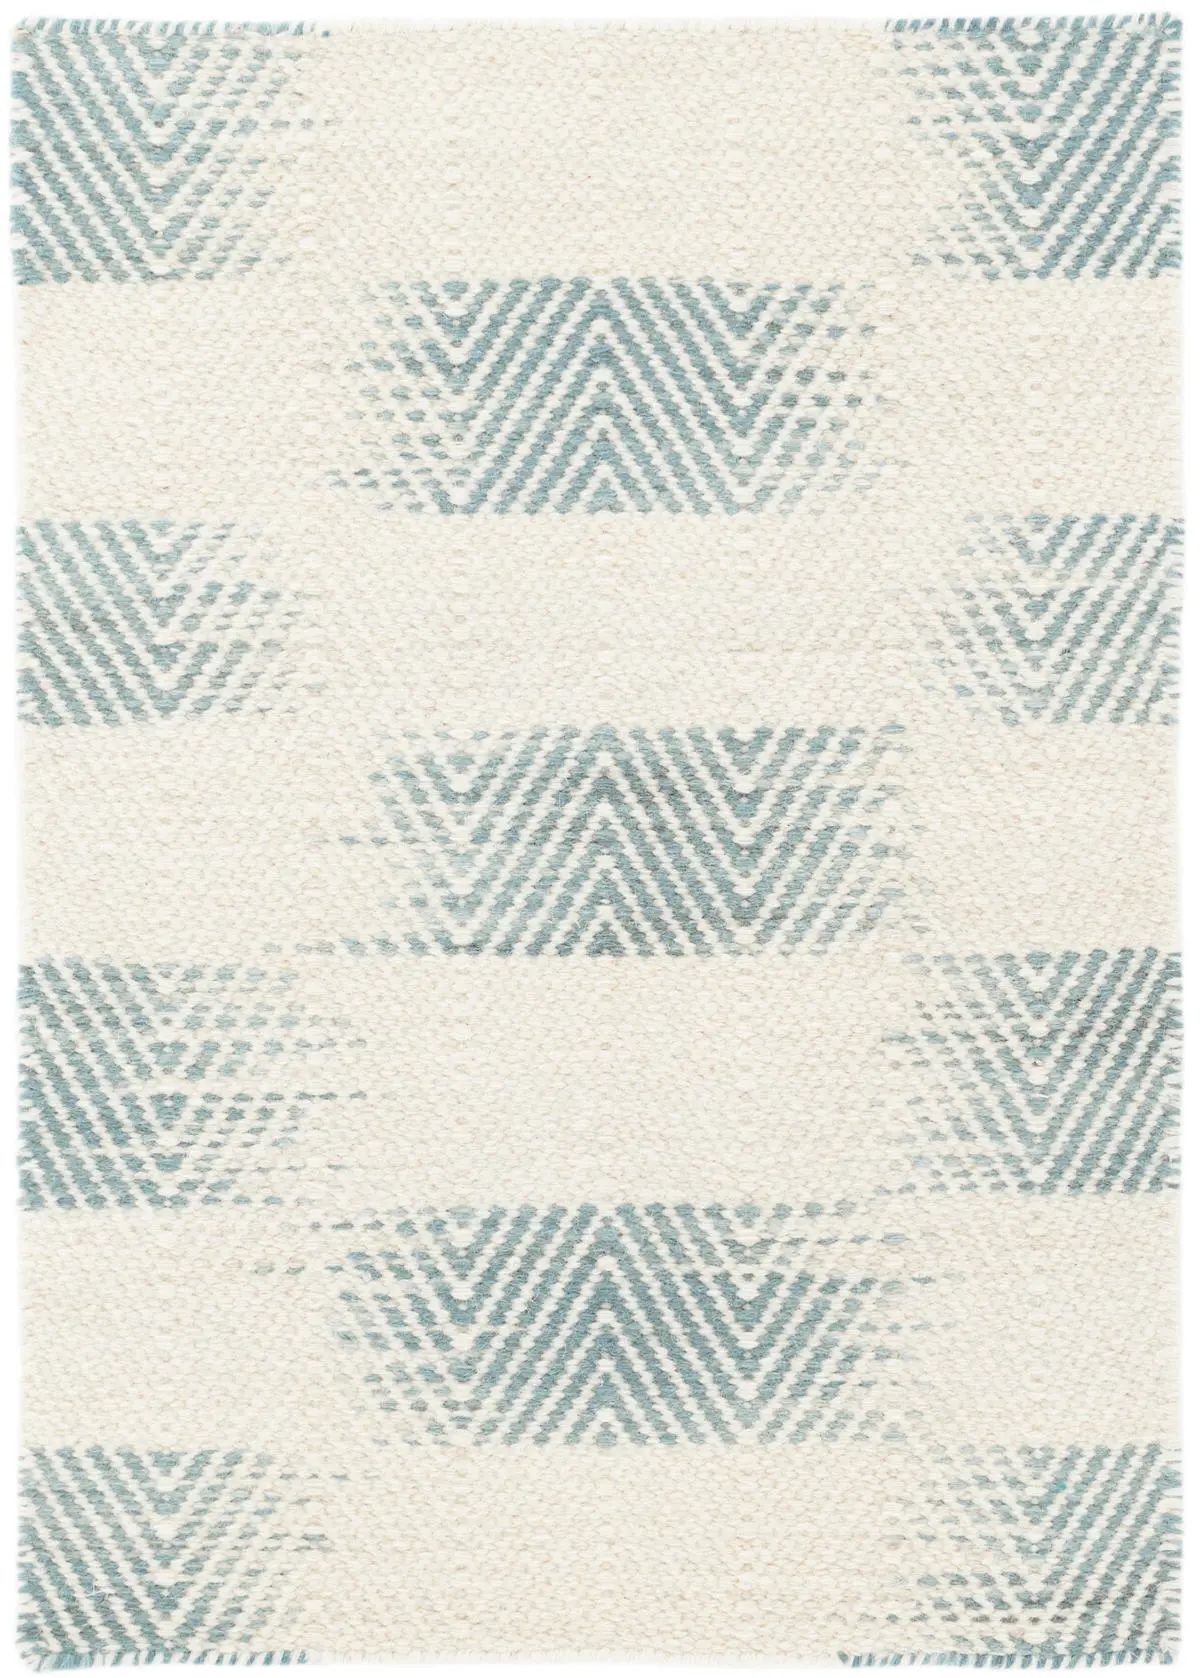 Tansy Blue Woven Wool Rug | Annie Selke